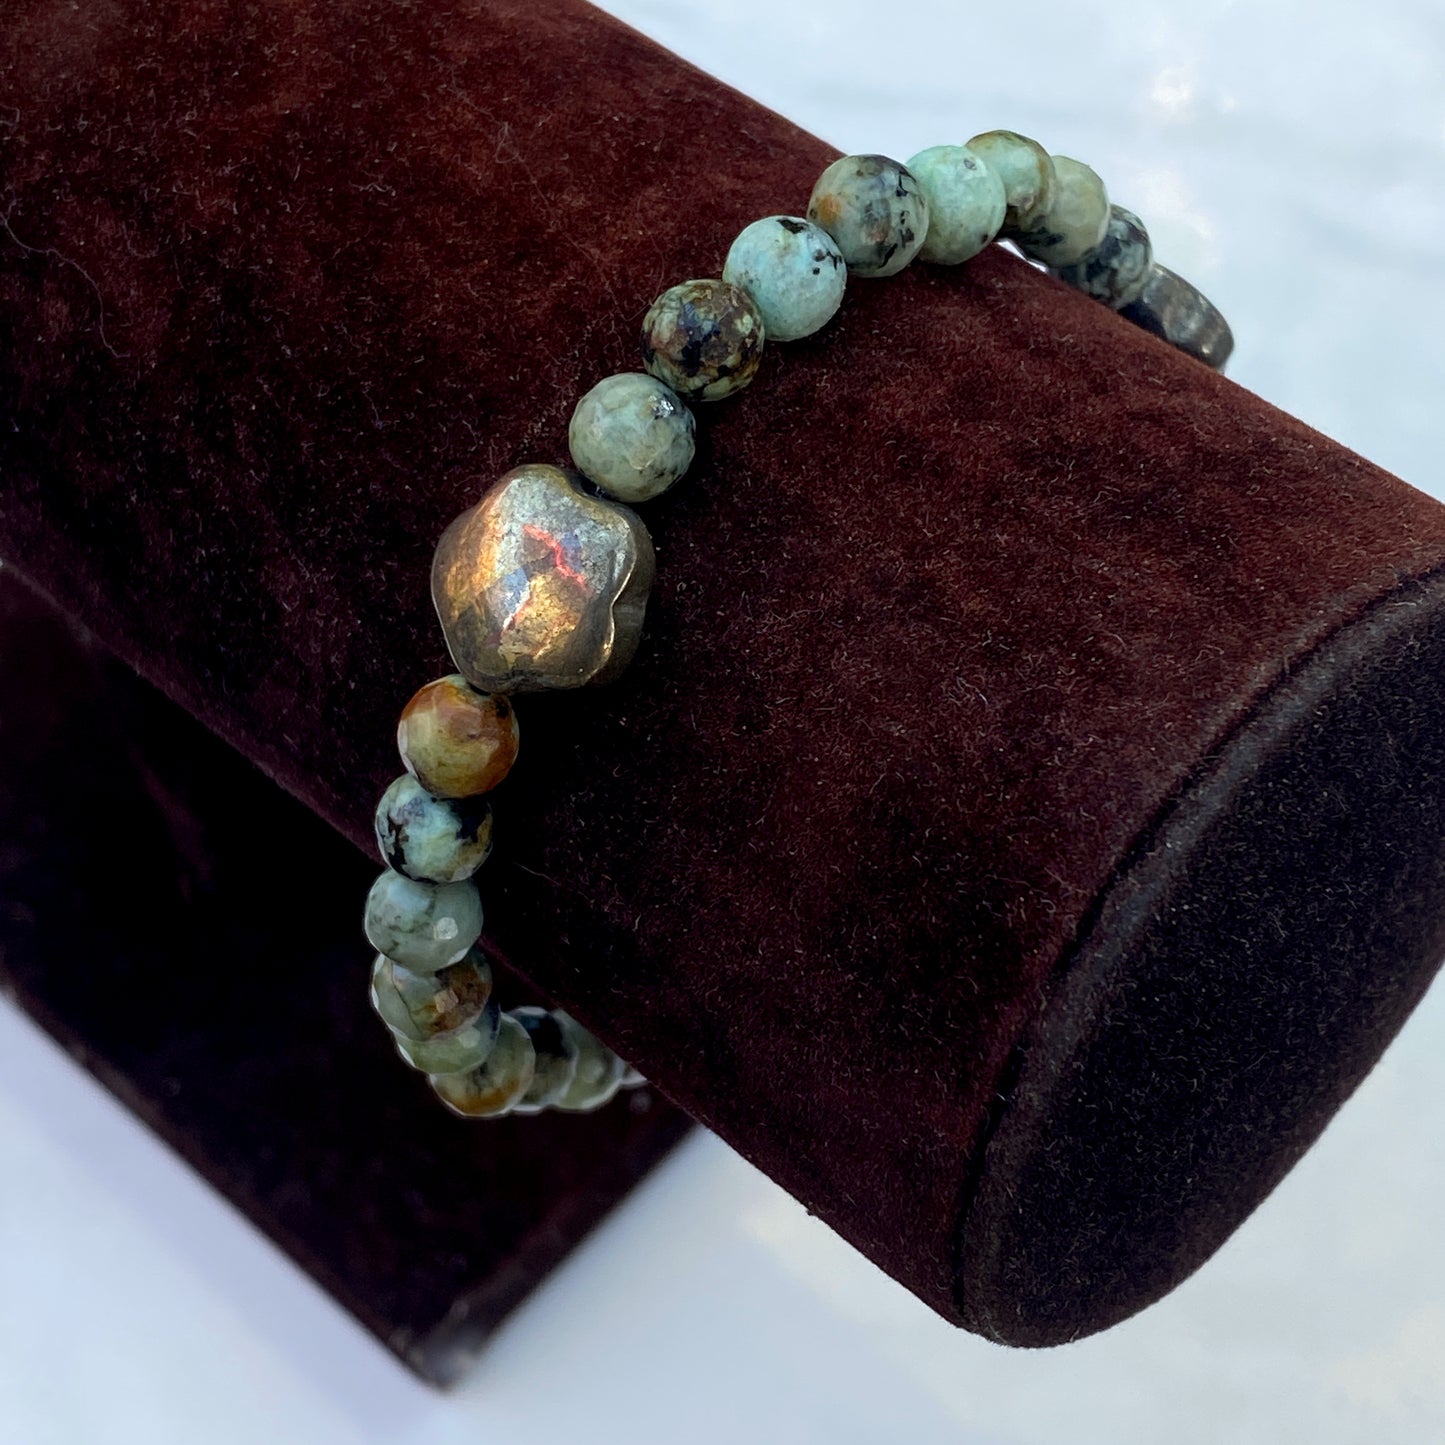 African turquoise and pyrite stretch bracelet